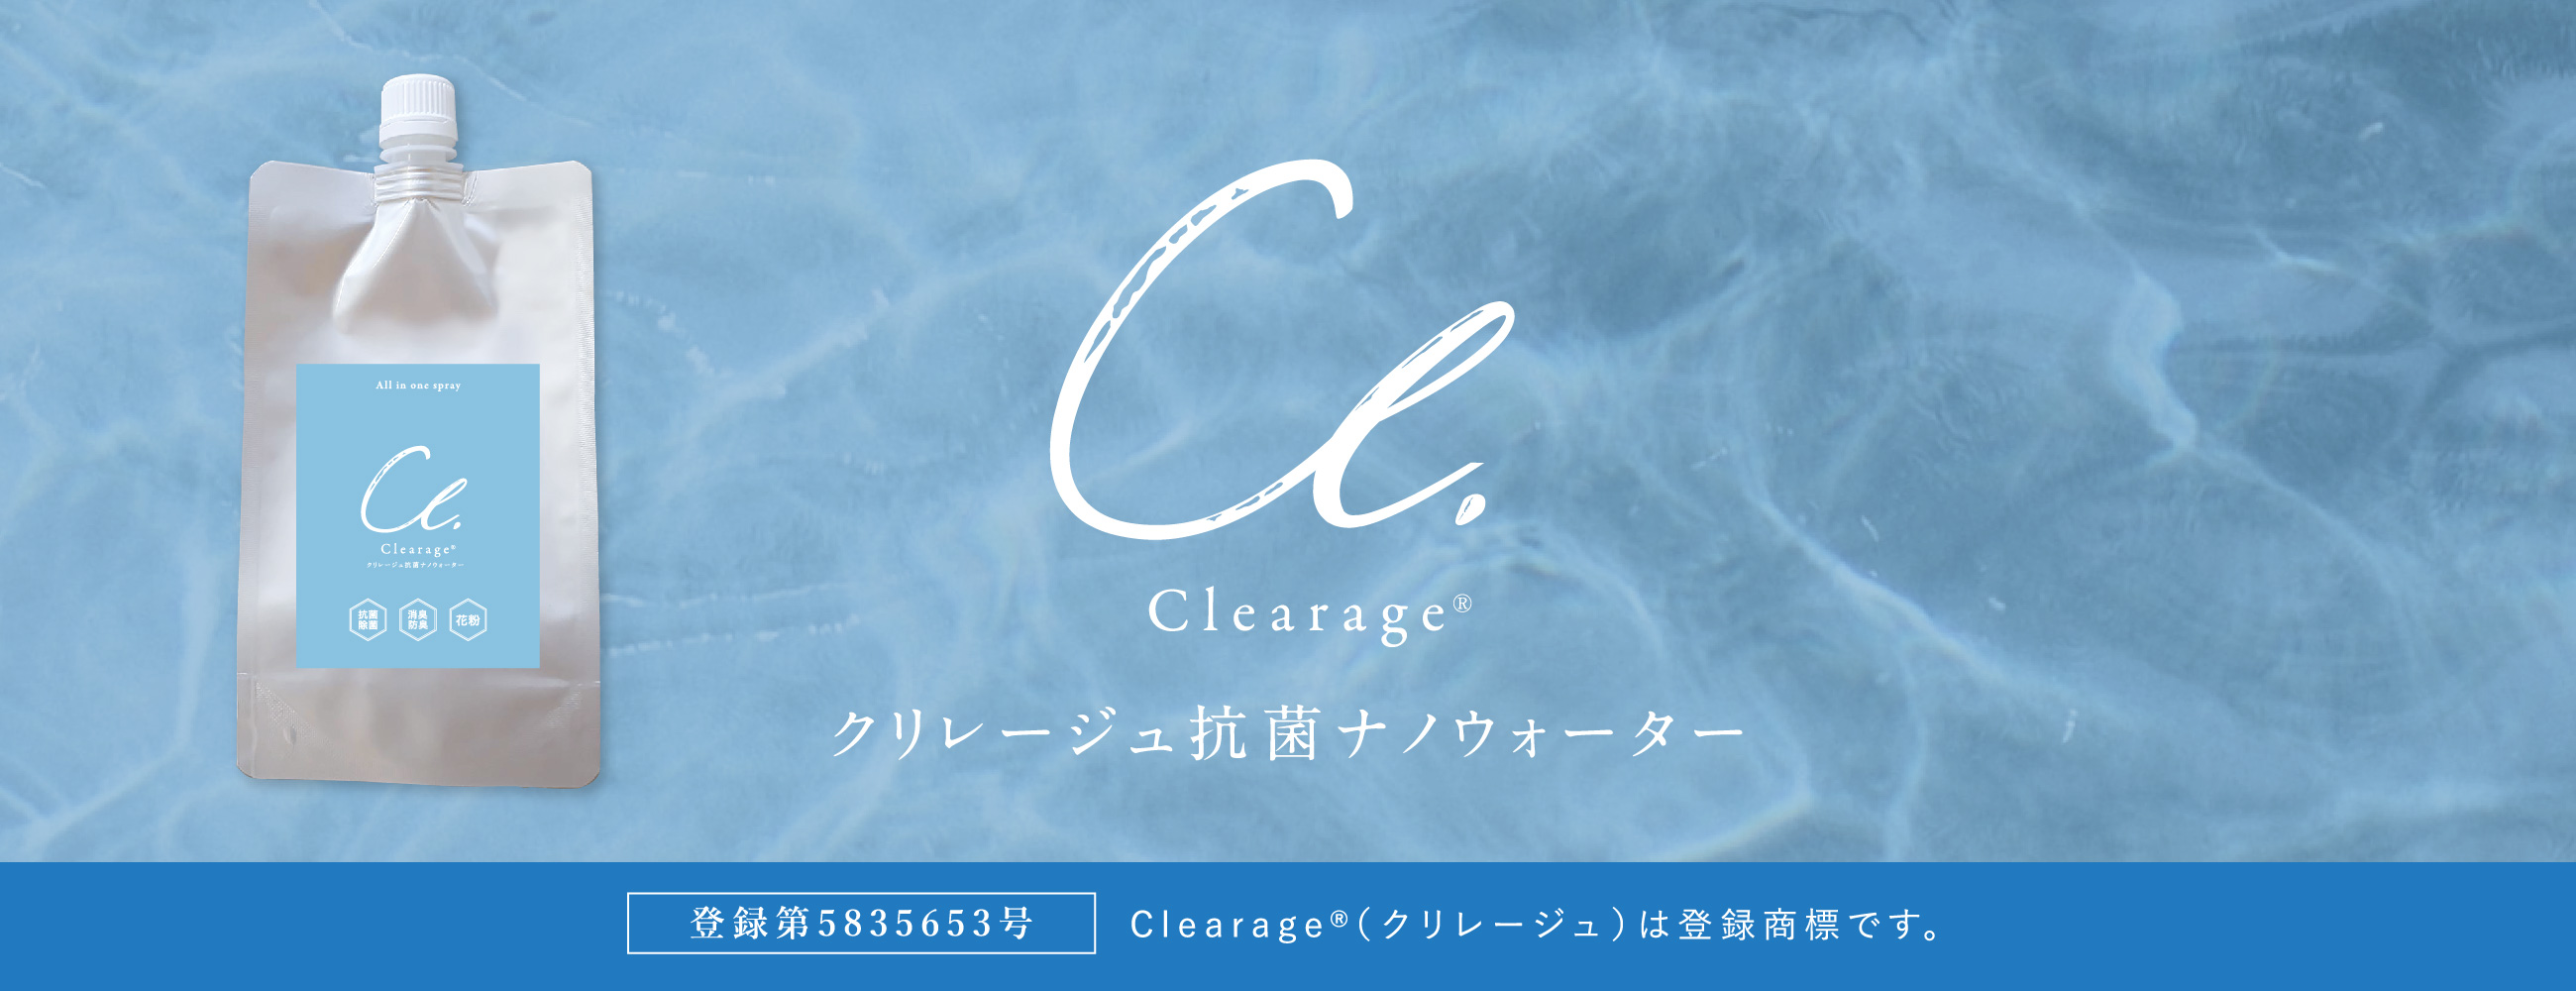 Clearage®（クリレージュ）